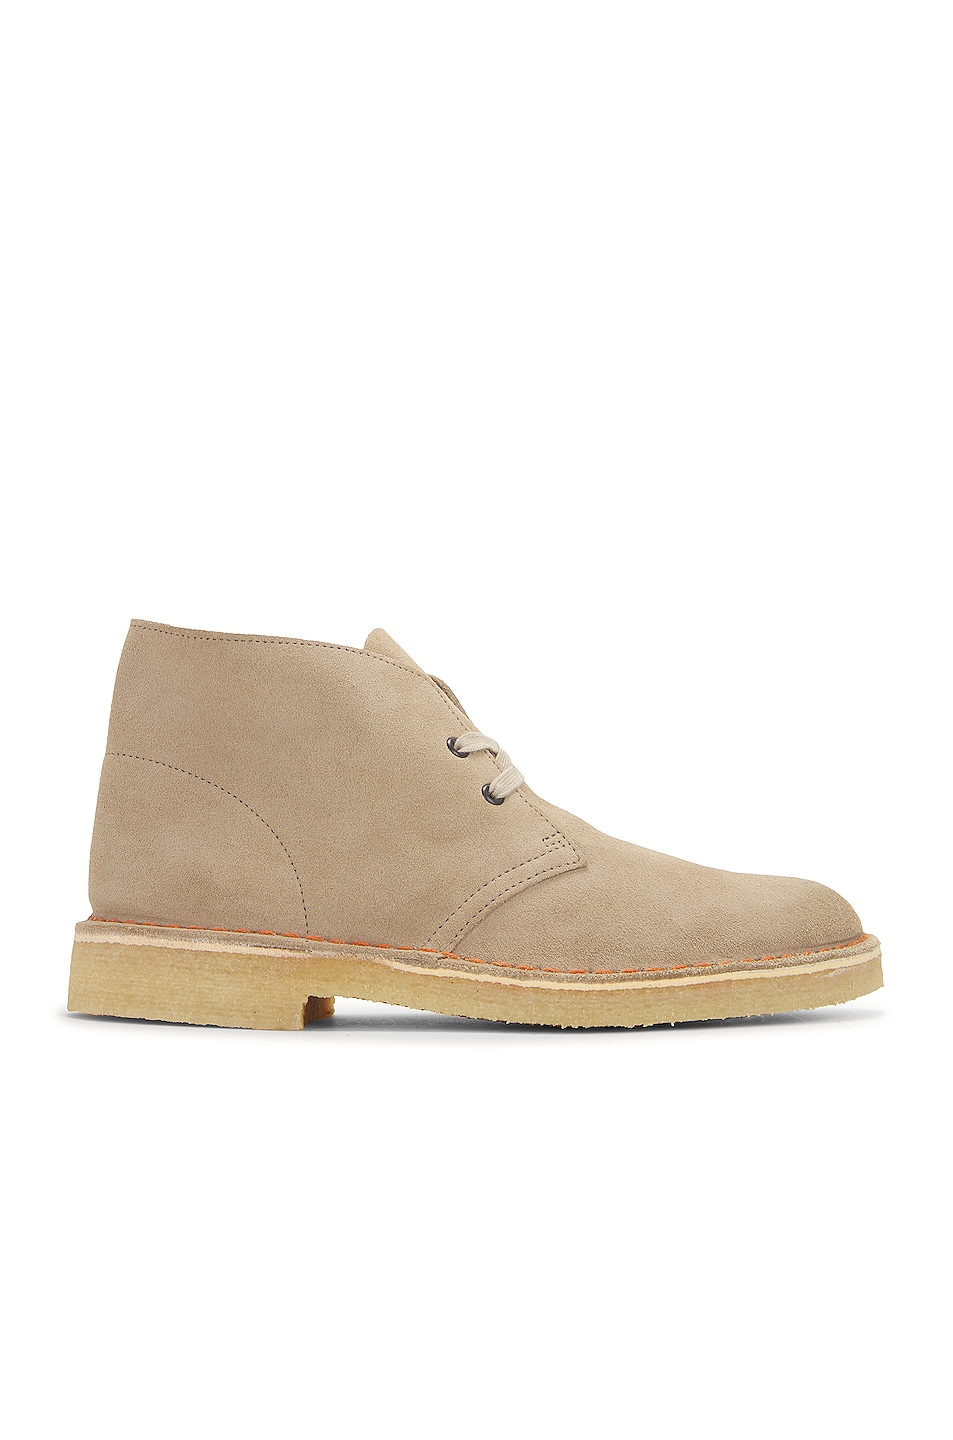 Image 1 of Clarks Desert Boot in San Suede in Sand Suede